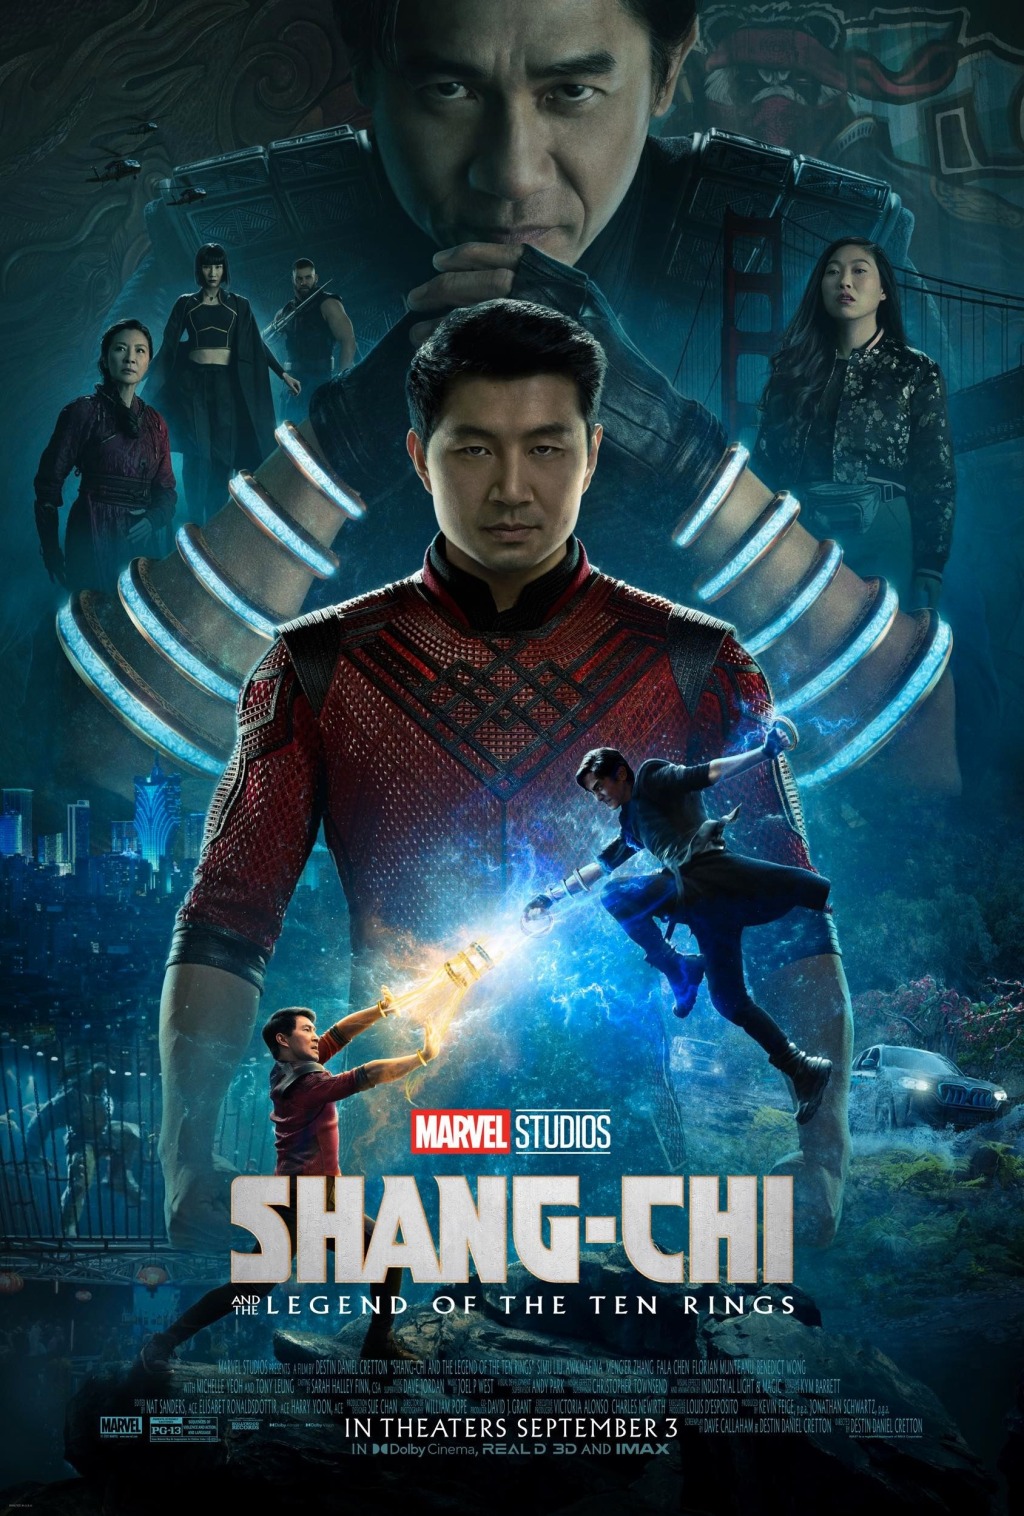 Shang-Chi and the Legend of the Ten Rings (2021) Movie Review: A middle of the pack Marvel film